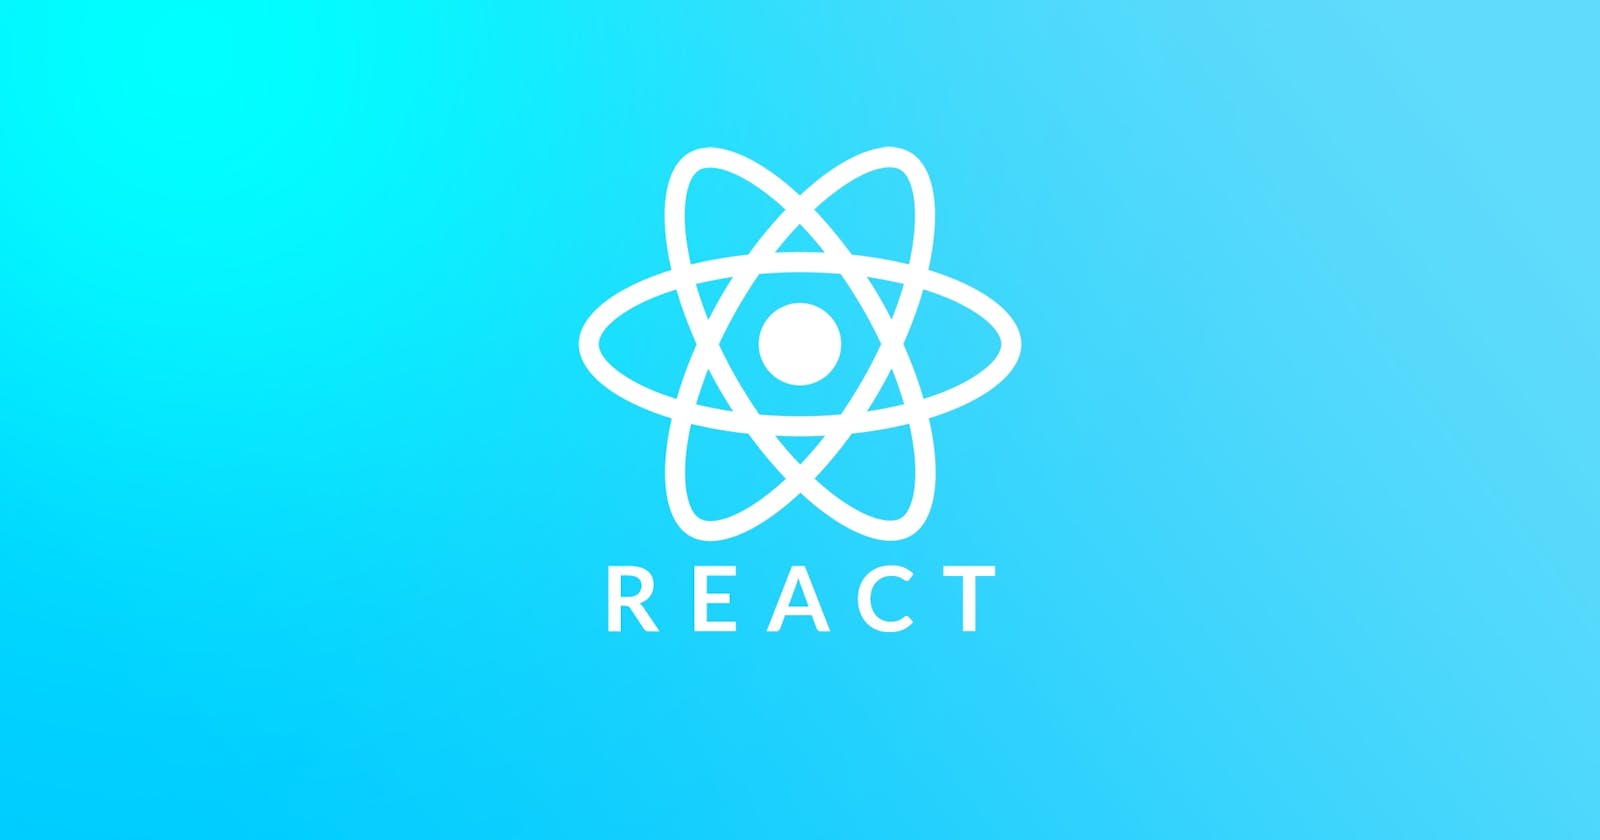 Why Should You Use React?